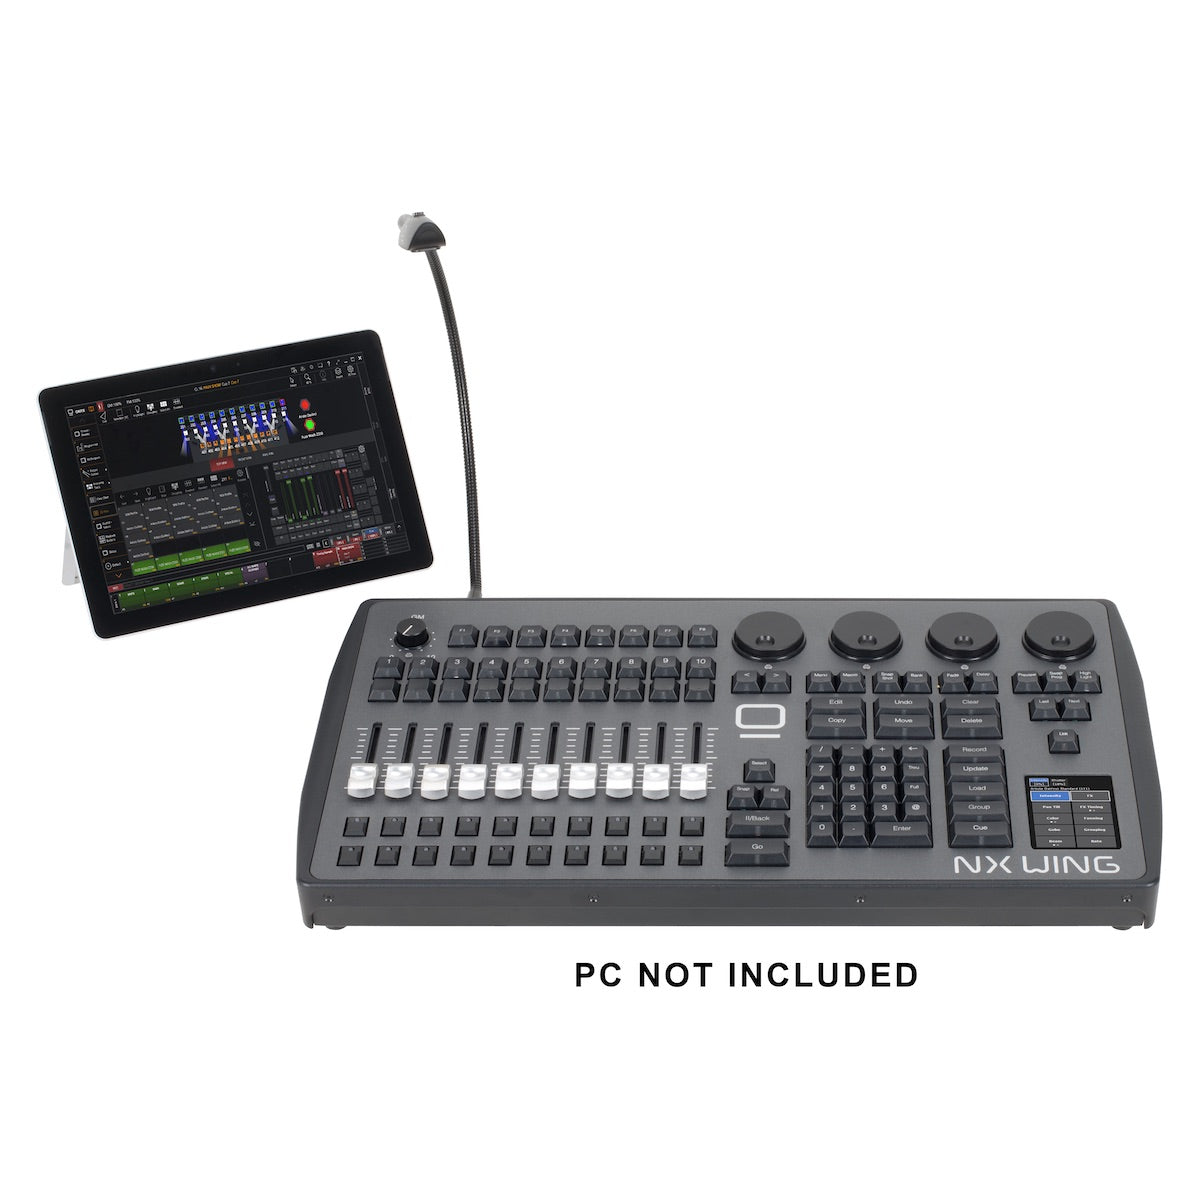 Elation NX WING - 64 Universe, 4x DMX port, SMPTE, MIDI, USB controller, tablet not included